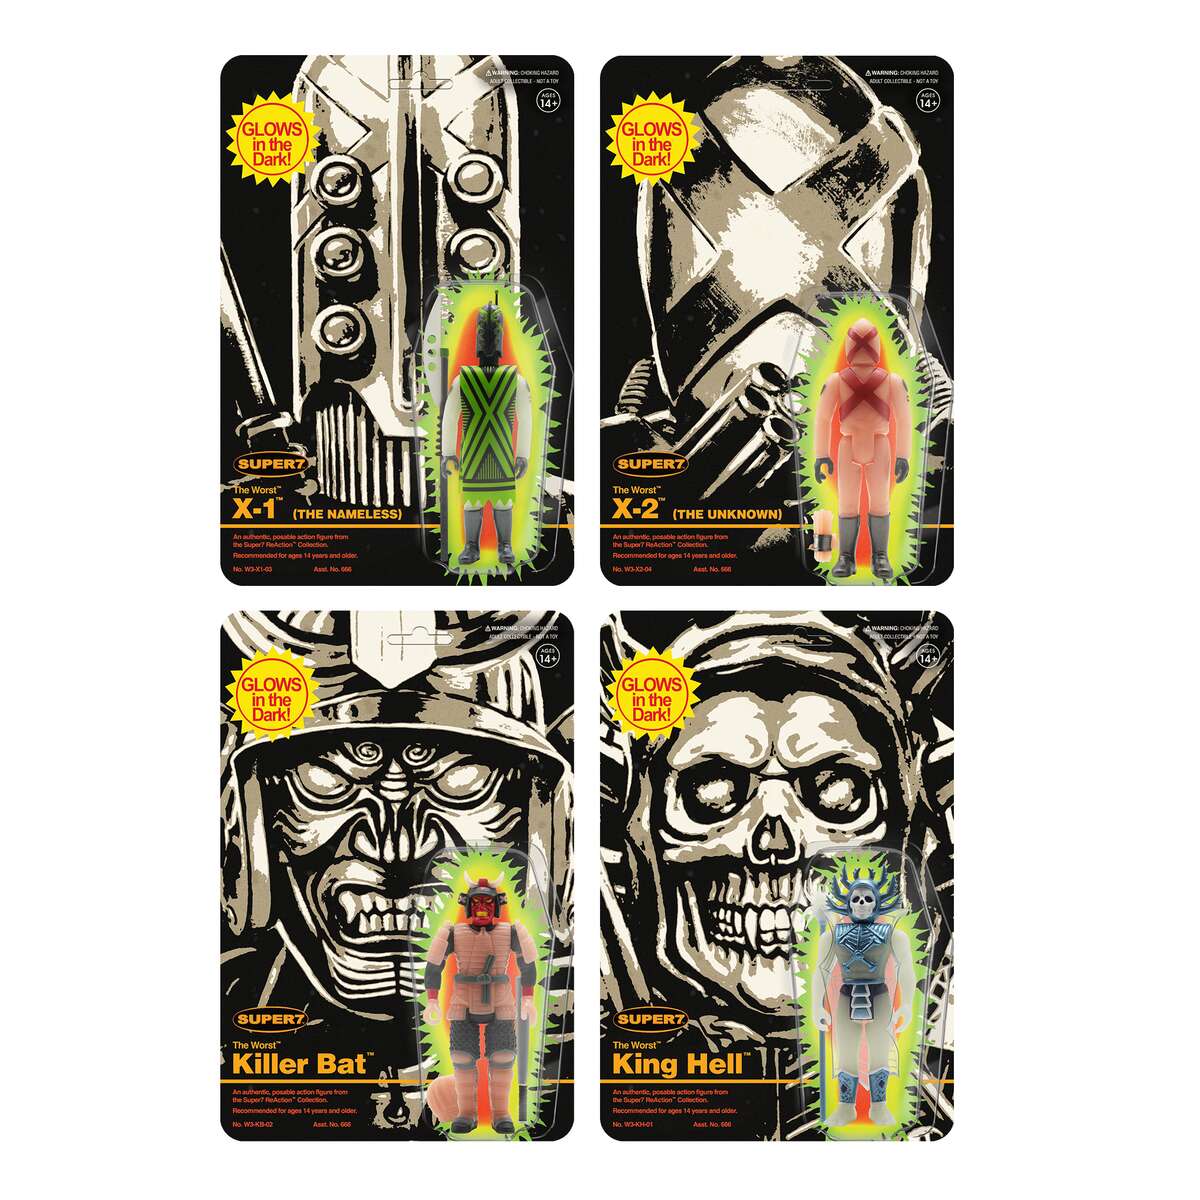 The WORST SDCC Monster Glow 4 pack